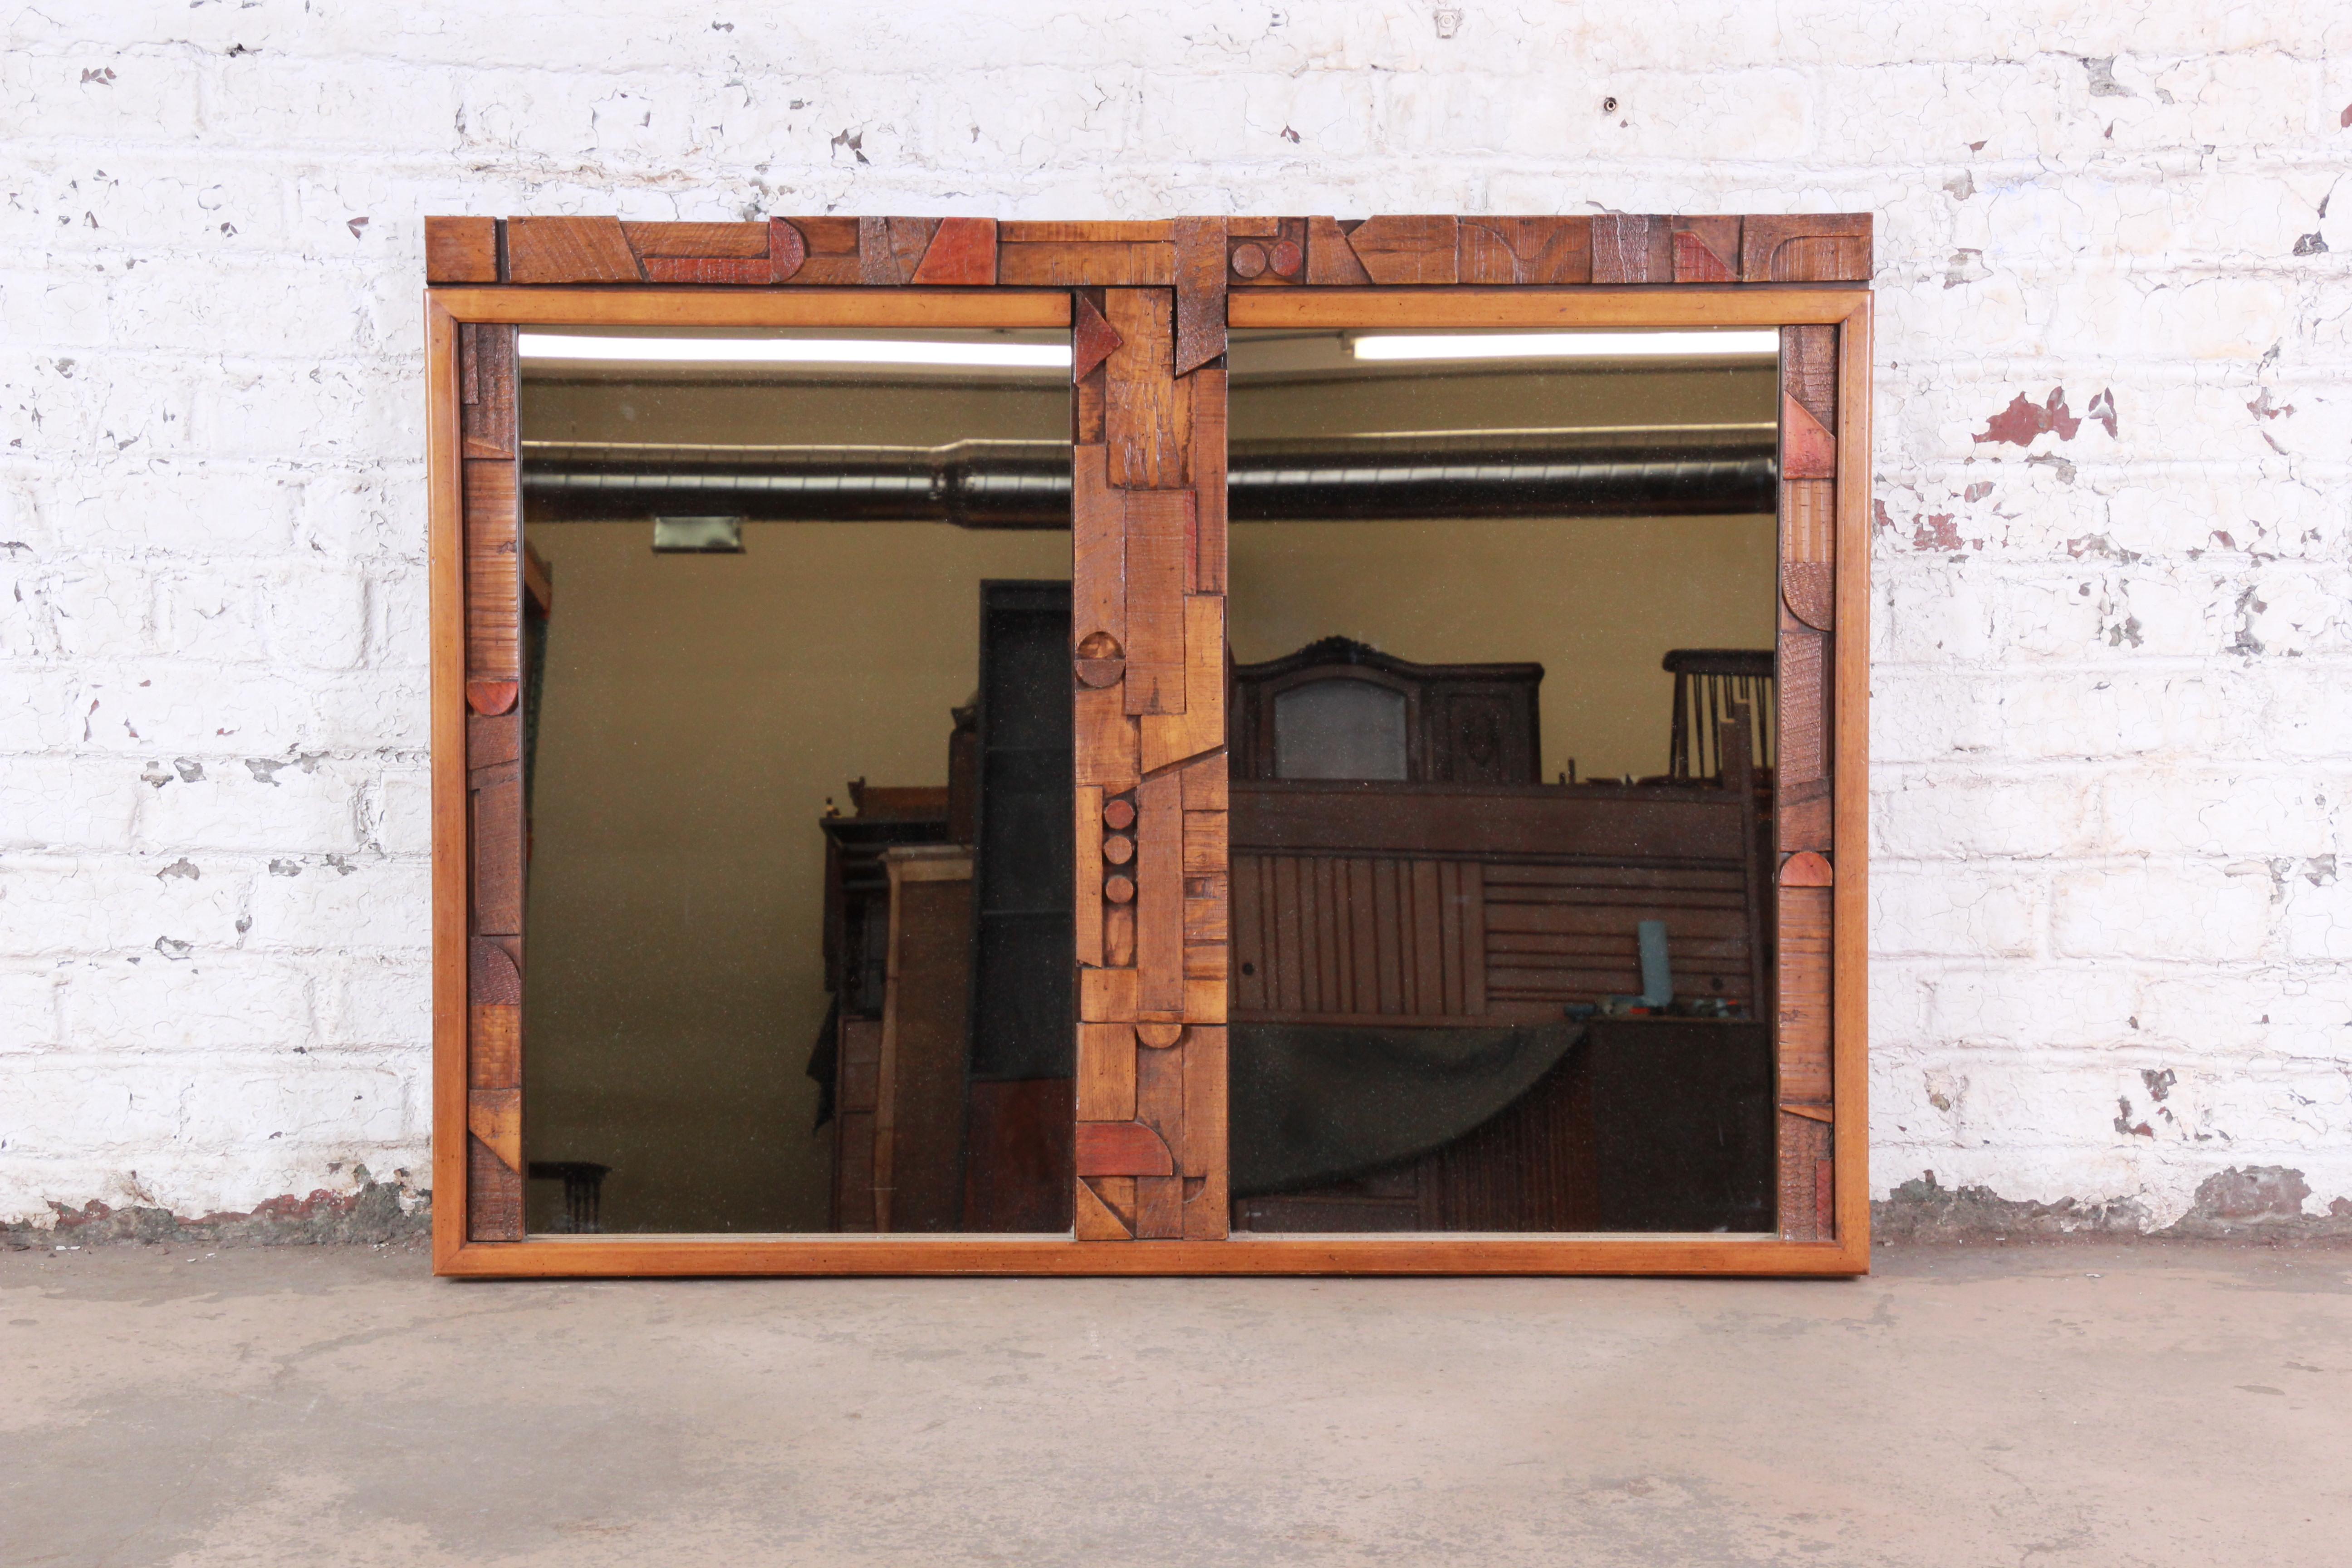 Pueblo Mid-Century Modern Brutalist double mirror

Made by Lane Furniture Co.

USA, 1970s

Mirror and oak

Measures: 55